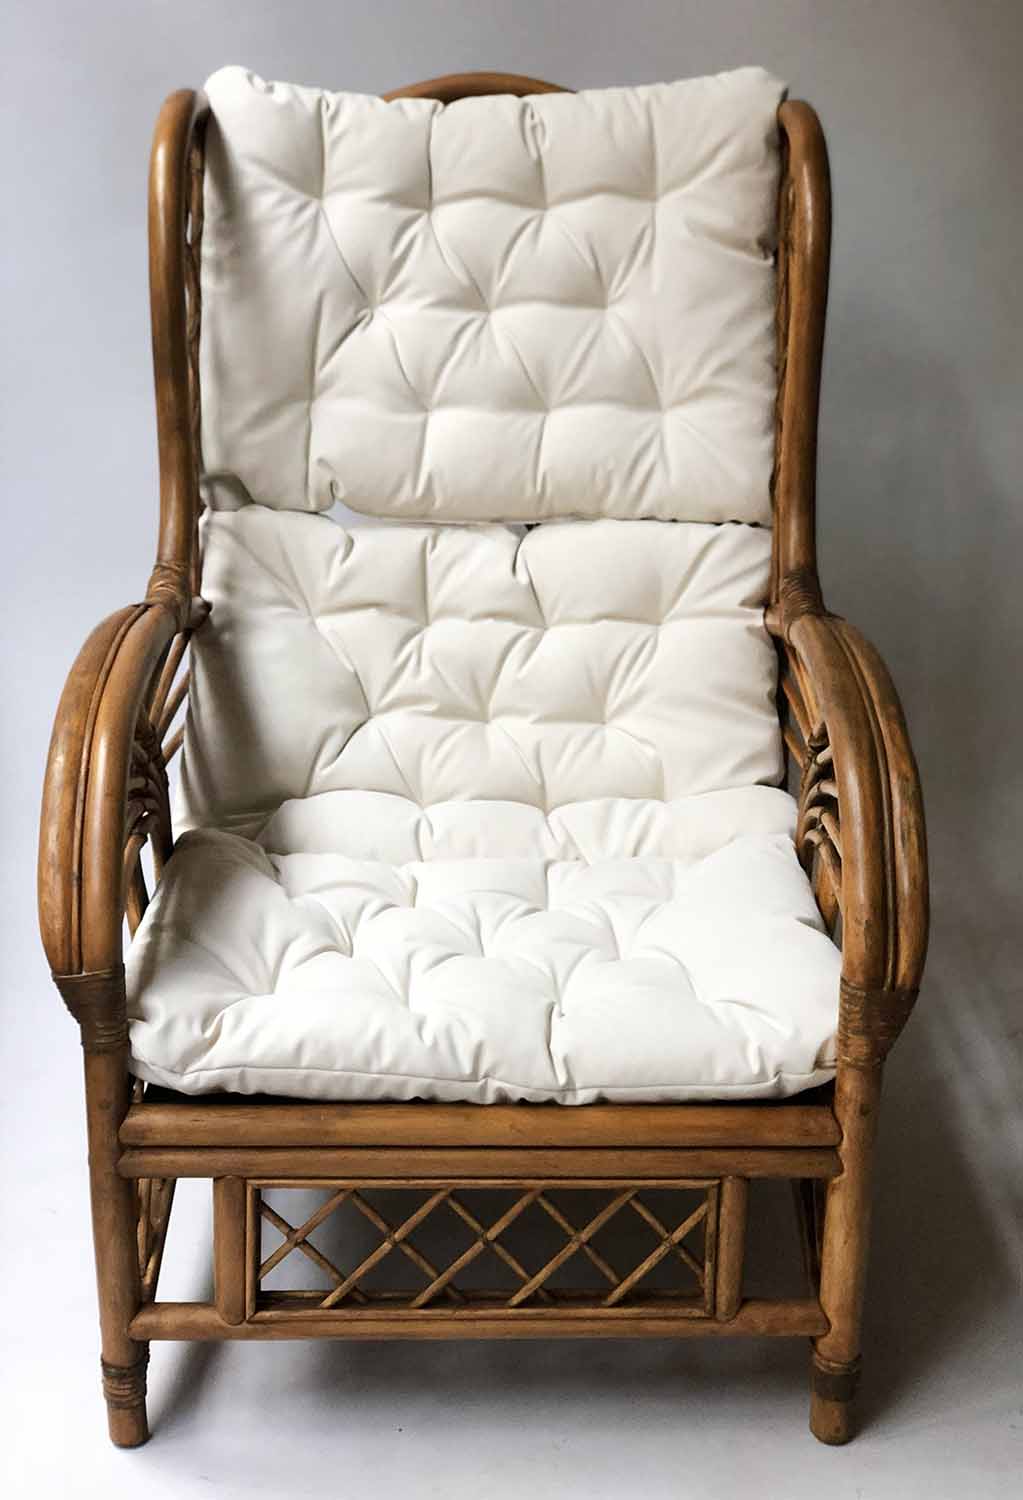 RATTAN ARMCHAIR, vintage 1930's inspired bent and woven rattan with cushion pads, 67cm W. - Image 3 of 3